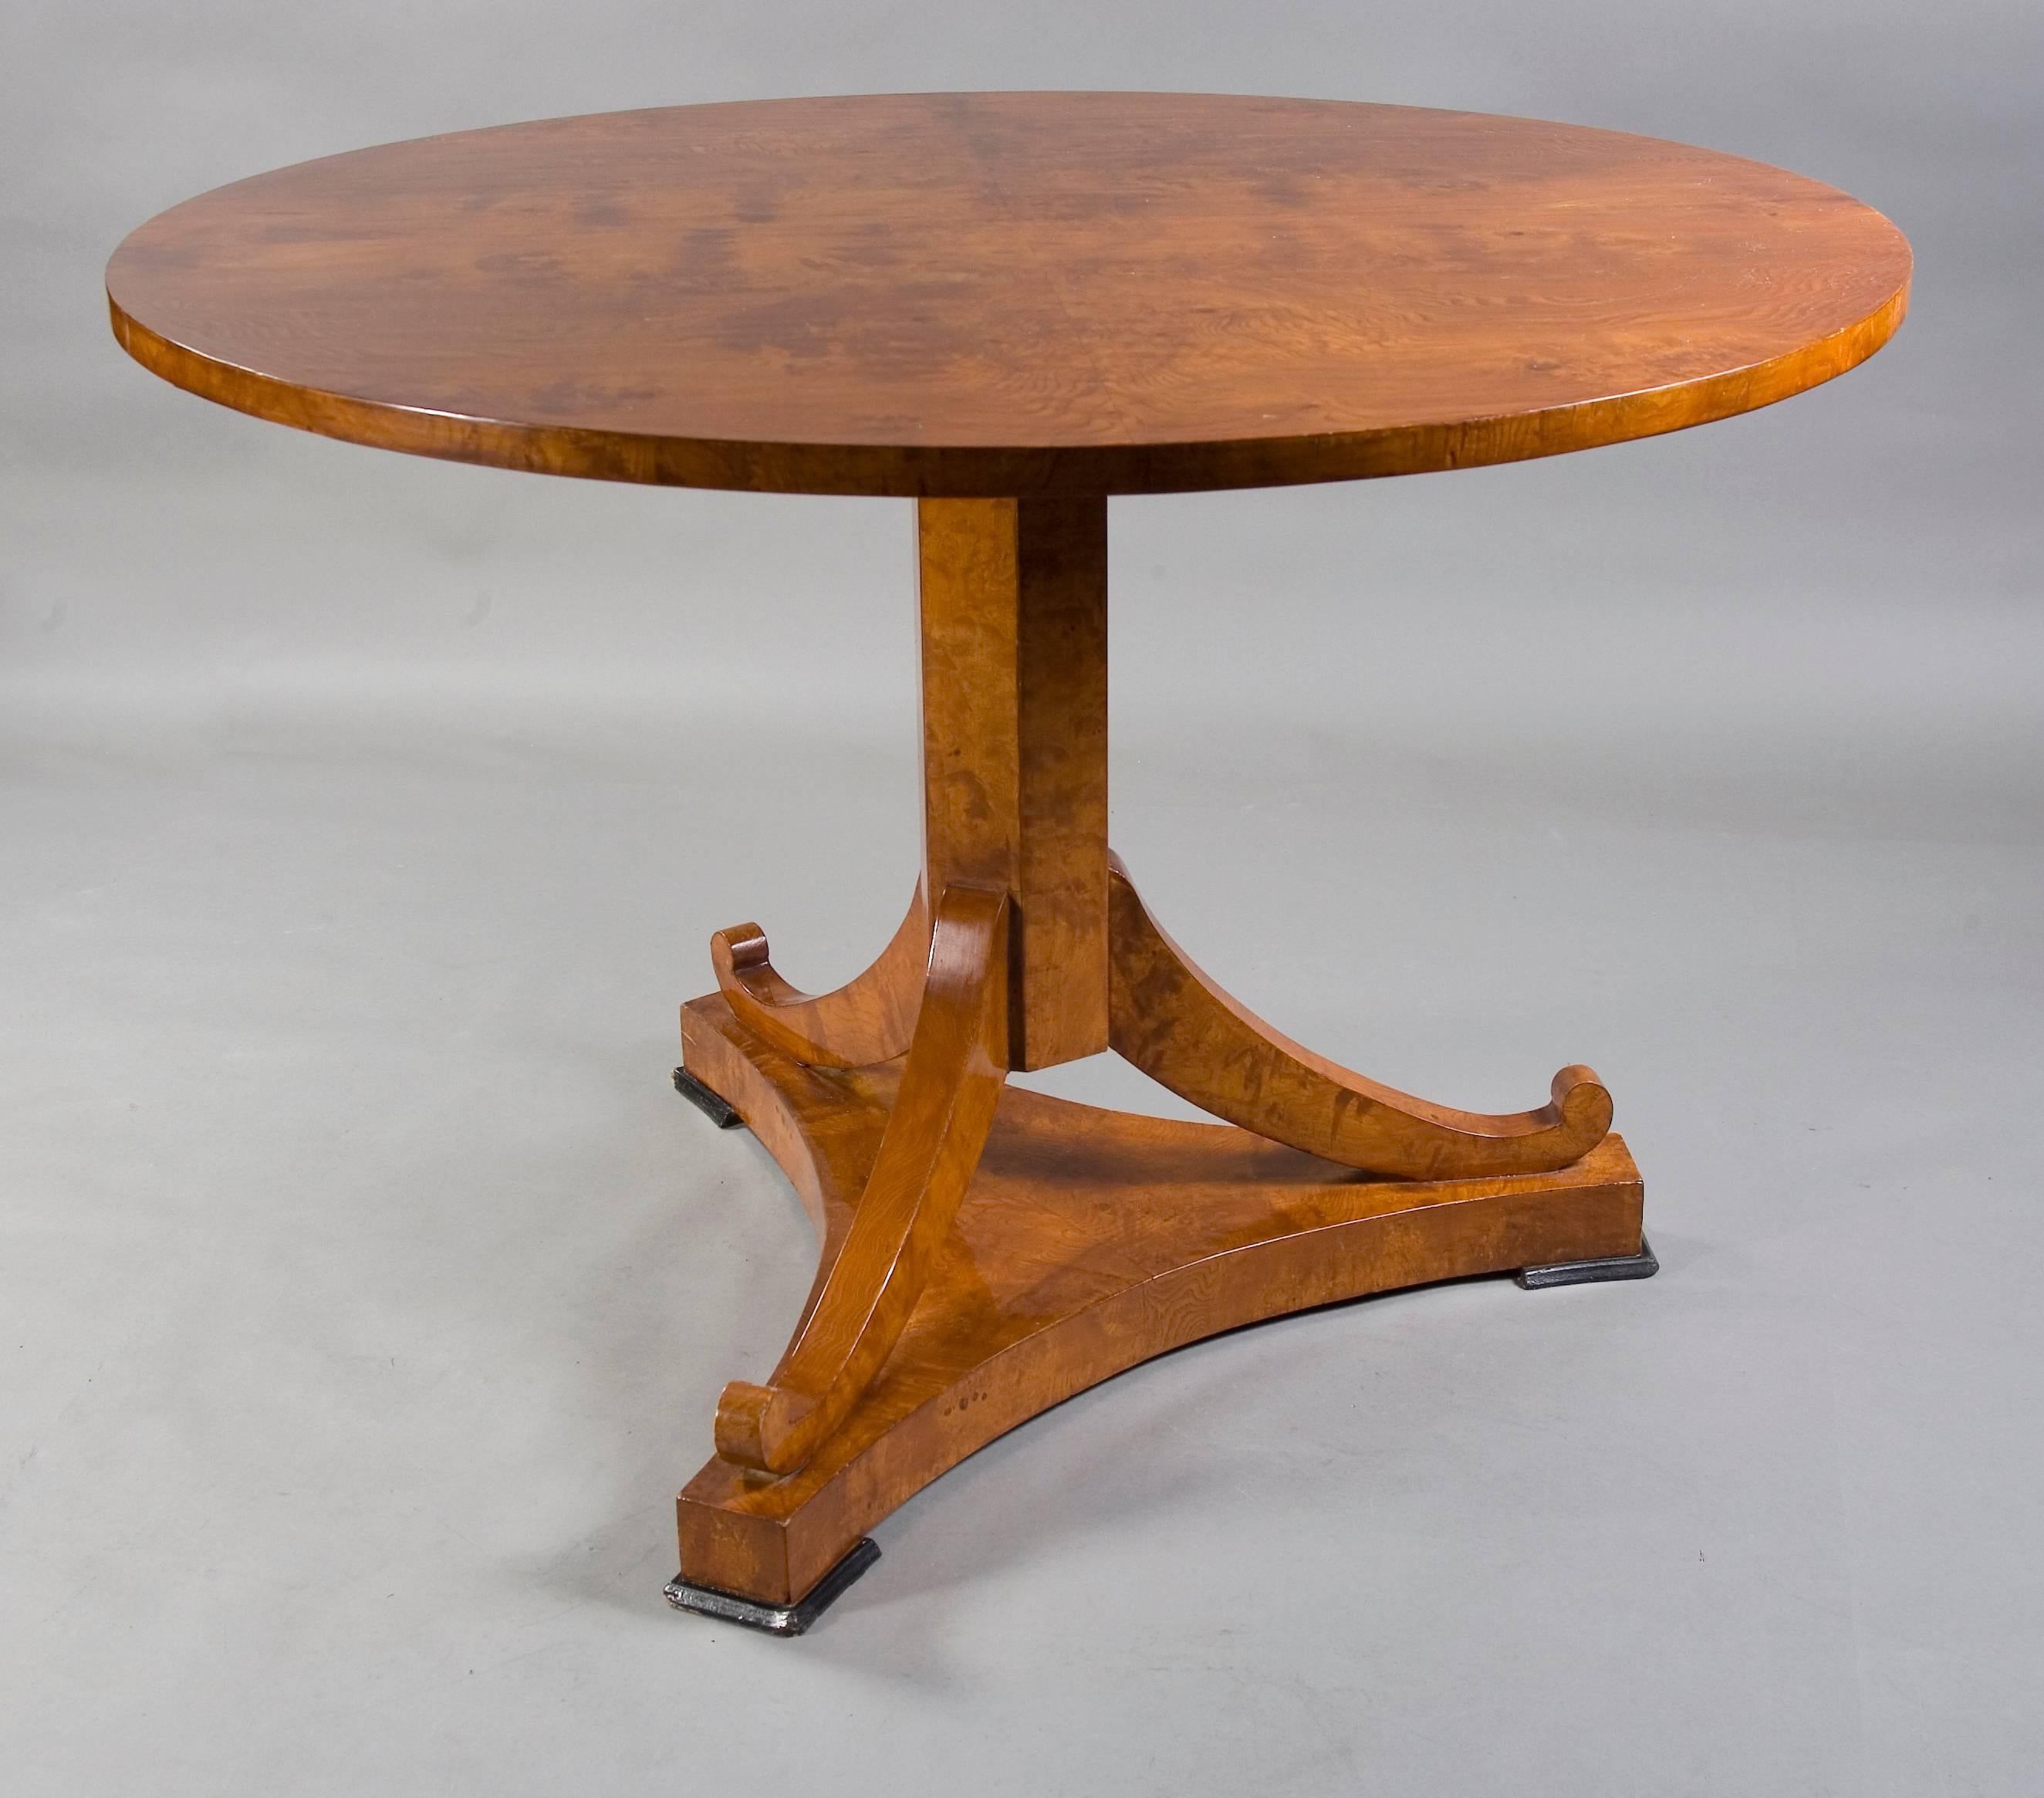 Ash root on solid wood. Three-sided base plate on panes. Centrally ascending, eightfold folded column, flanked by three curved volutes. A strict form of early Biedermeier time. It is built with a folding mechanism. This type is very practical, not